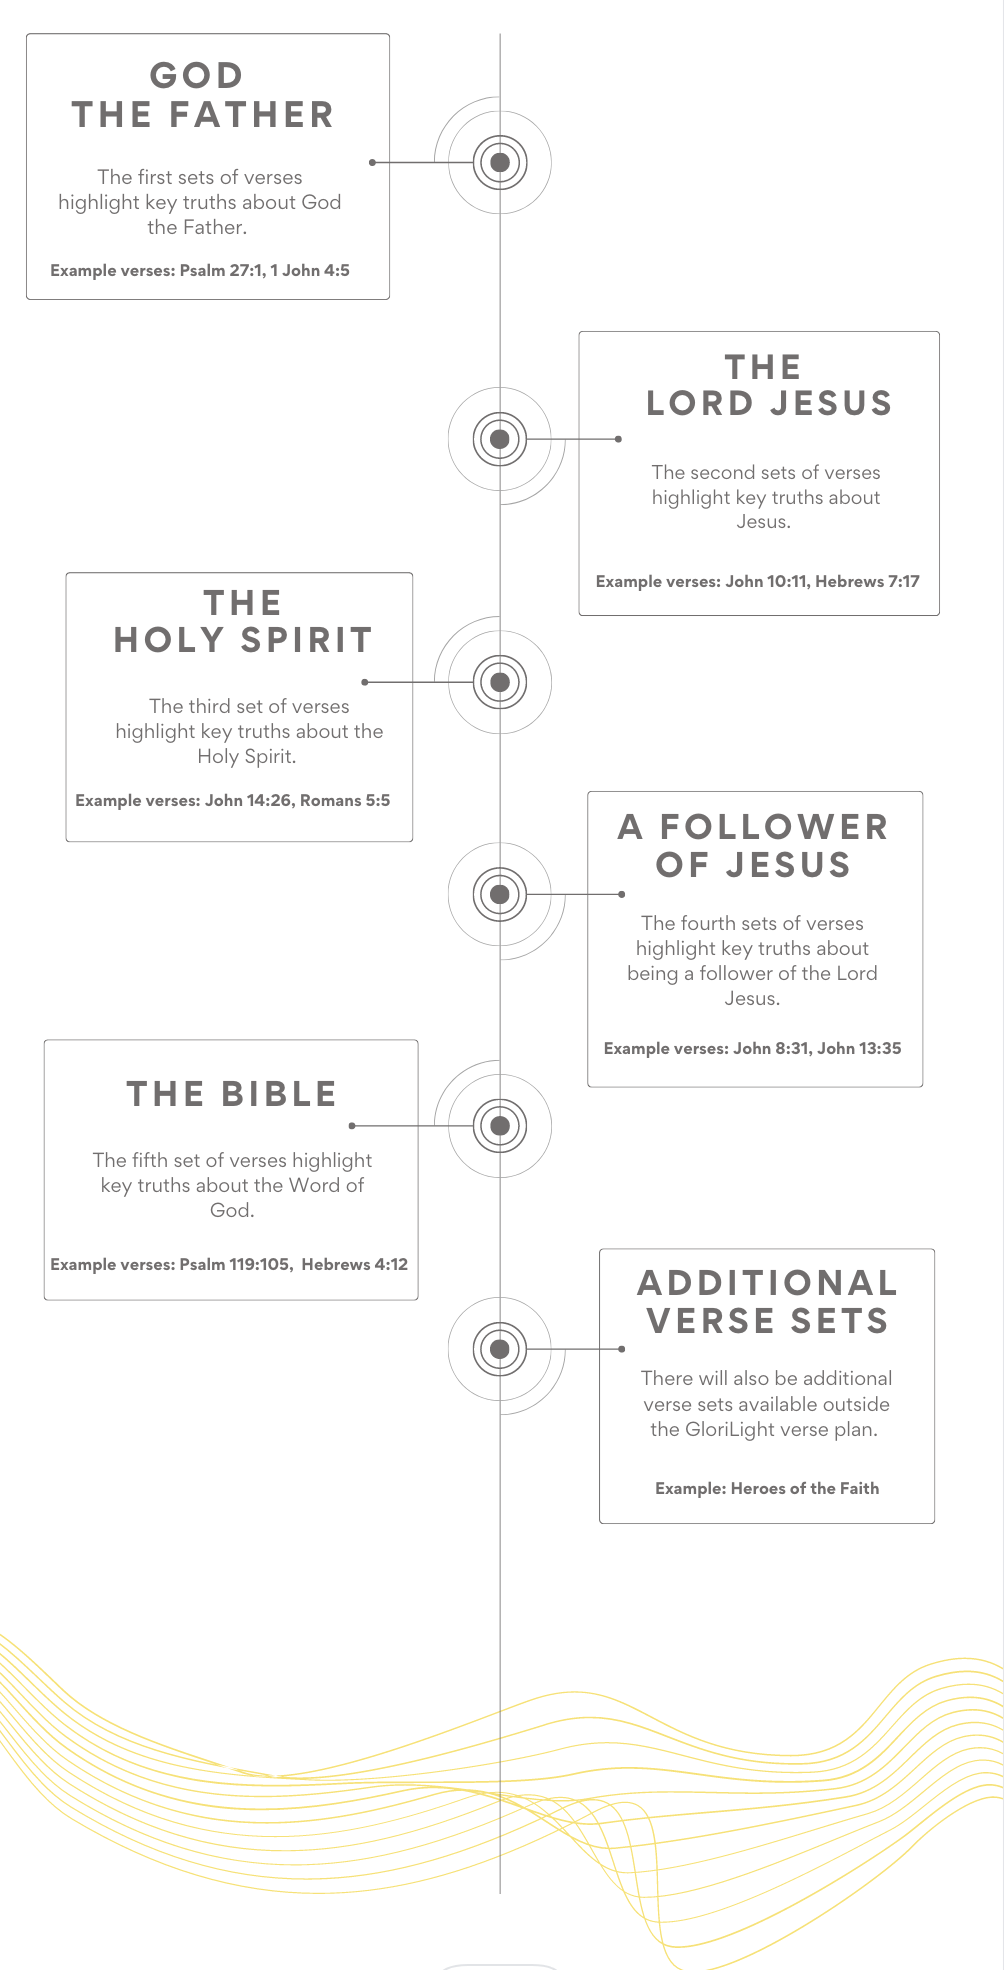 image of a guide we use to release the quarterly disc sets.  all text no image included.  Top box reads: God the Father, 2nd box reads: The Lord Jesus, 3rd box reads: The Holy Spirit, 4th box reads: A follower of Jesus, 5th box reads, The Bible, 6th box reads Additional Verse sets. 